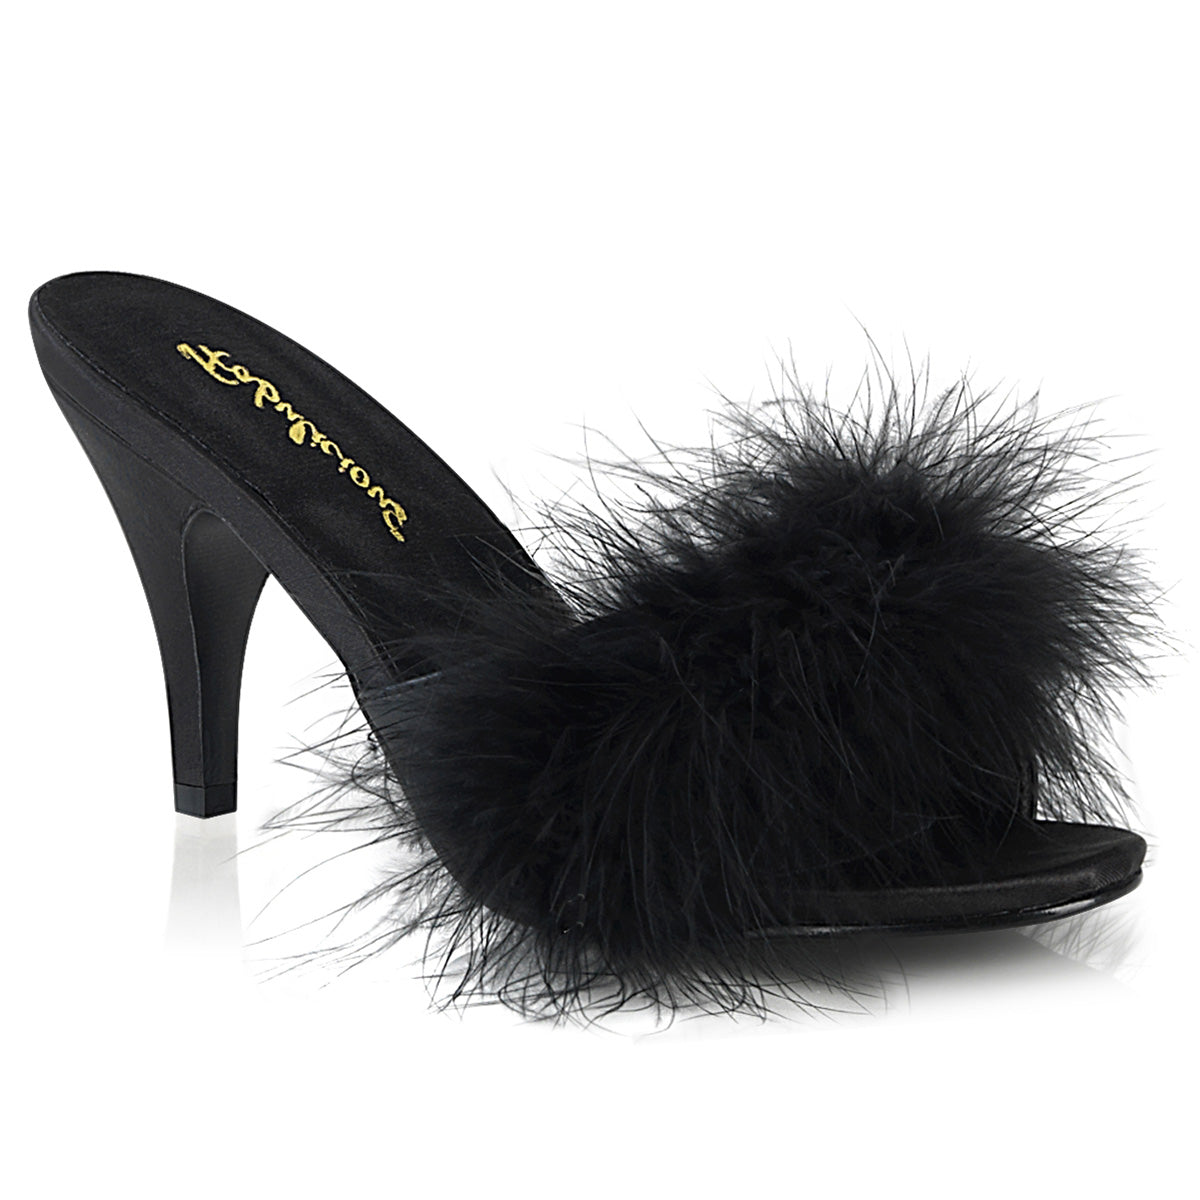 AMOUR-03 Fluffy Mule High Heels Black Multi view 1